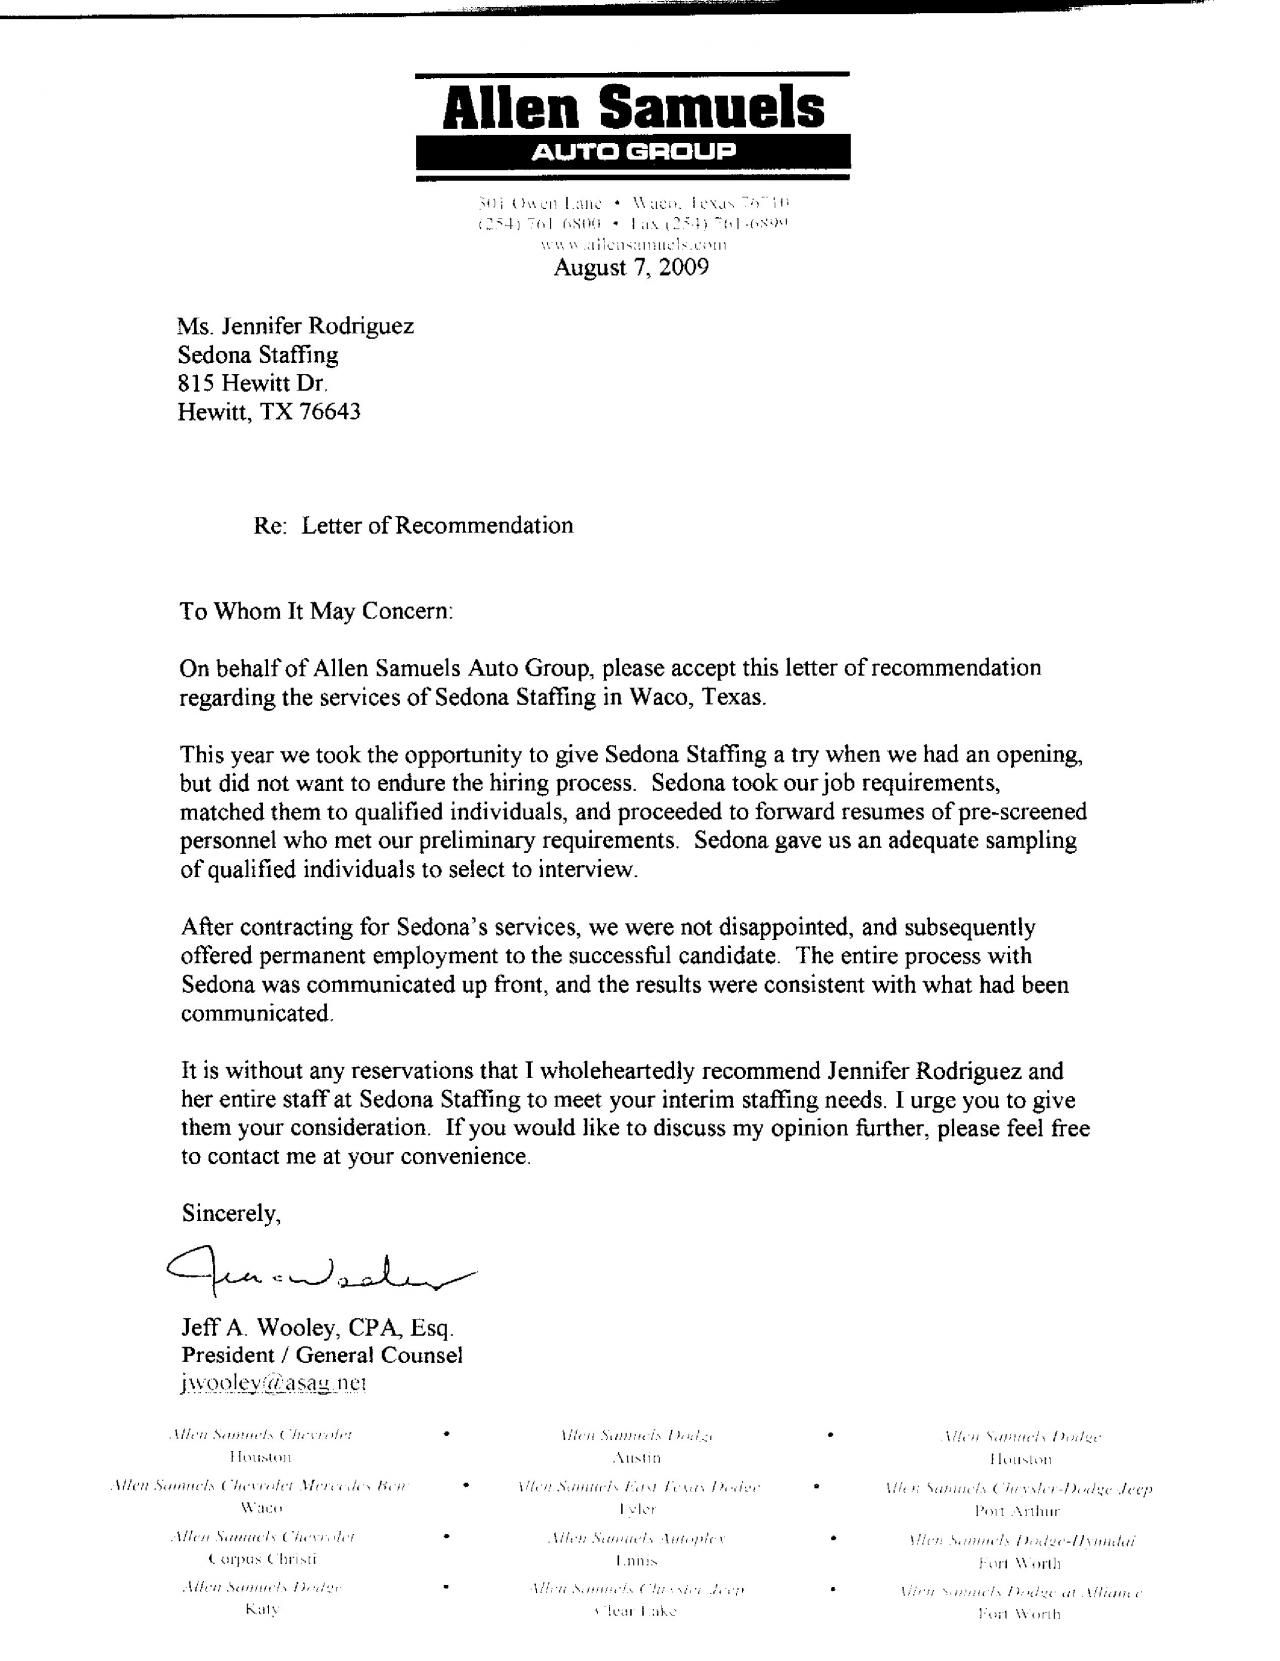 Customer Reference Letter Template - Sedona Staffing Waco Temple Killeen Client Customer